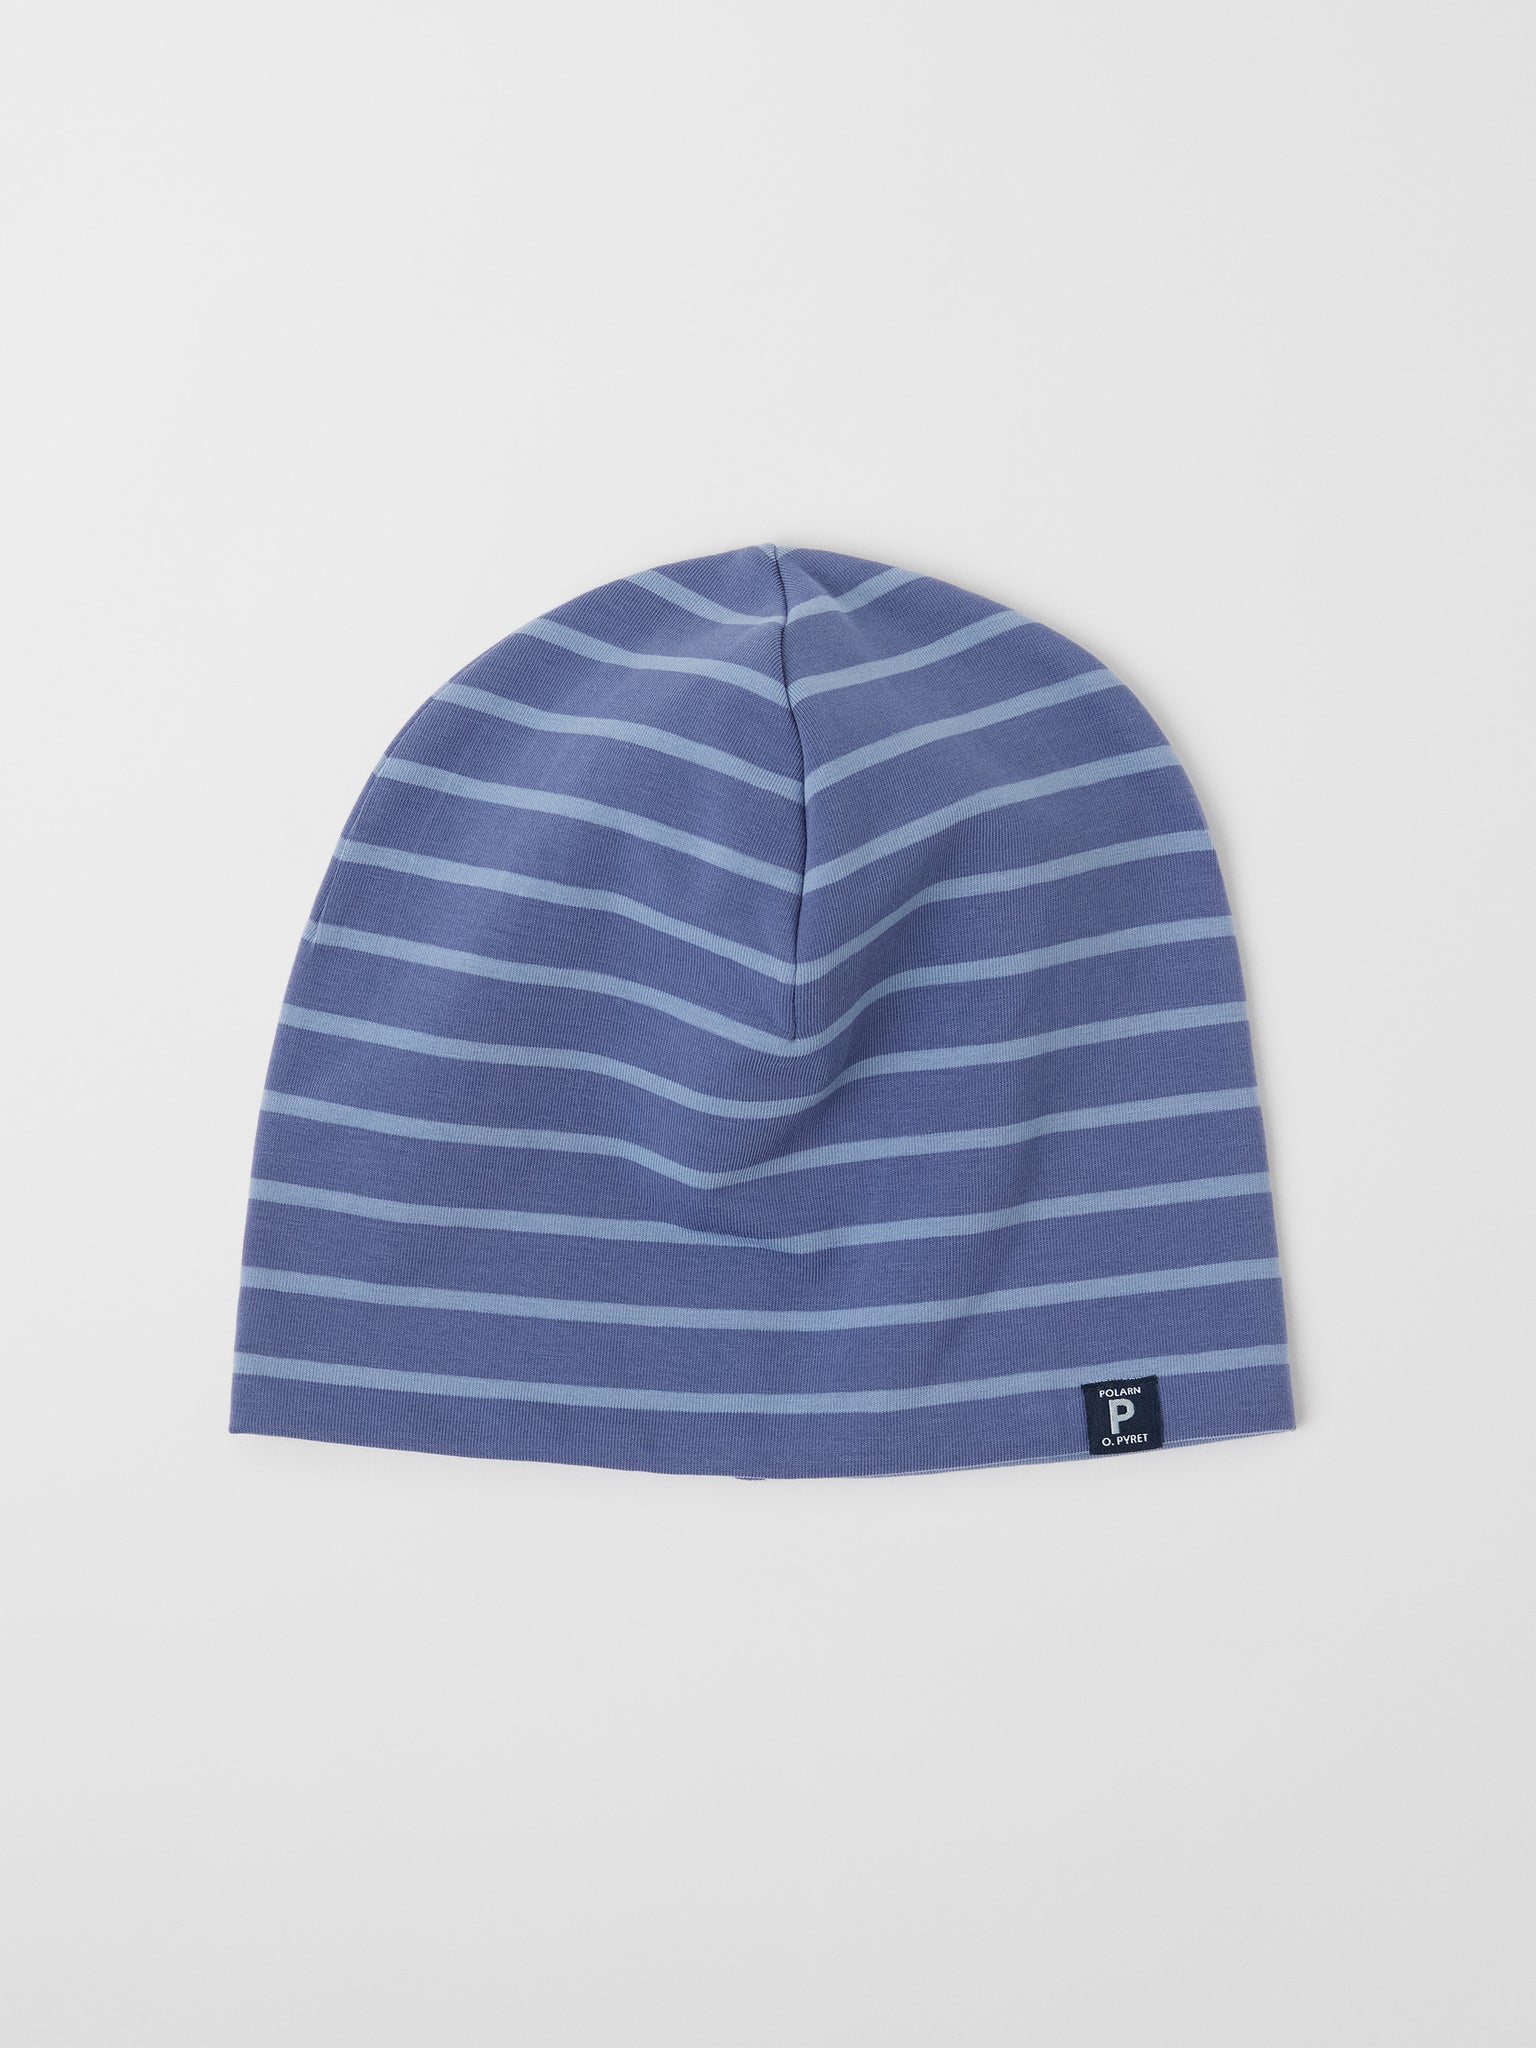 Fleece Lined Blue Kids Winter Hat from the Polarn O. Pyret outerwear collection. The best ethical kids outerwear.